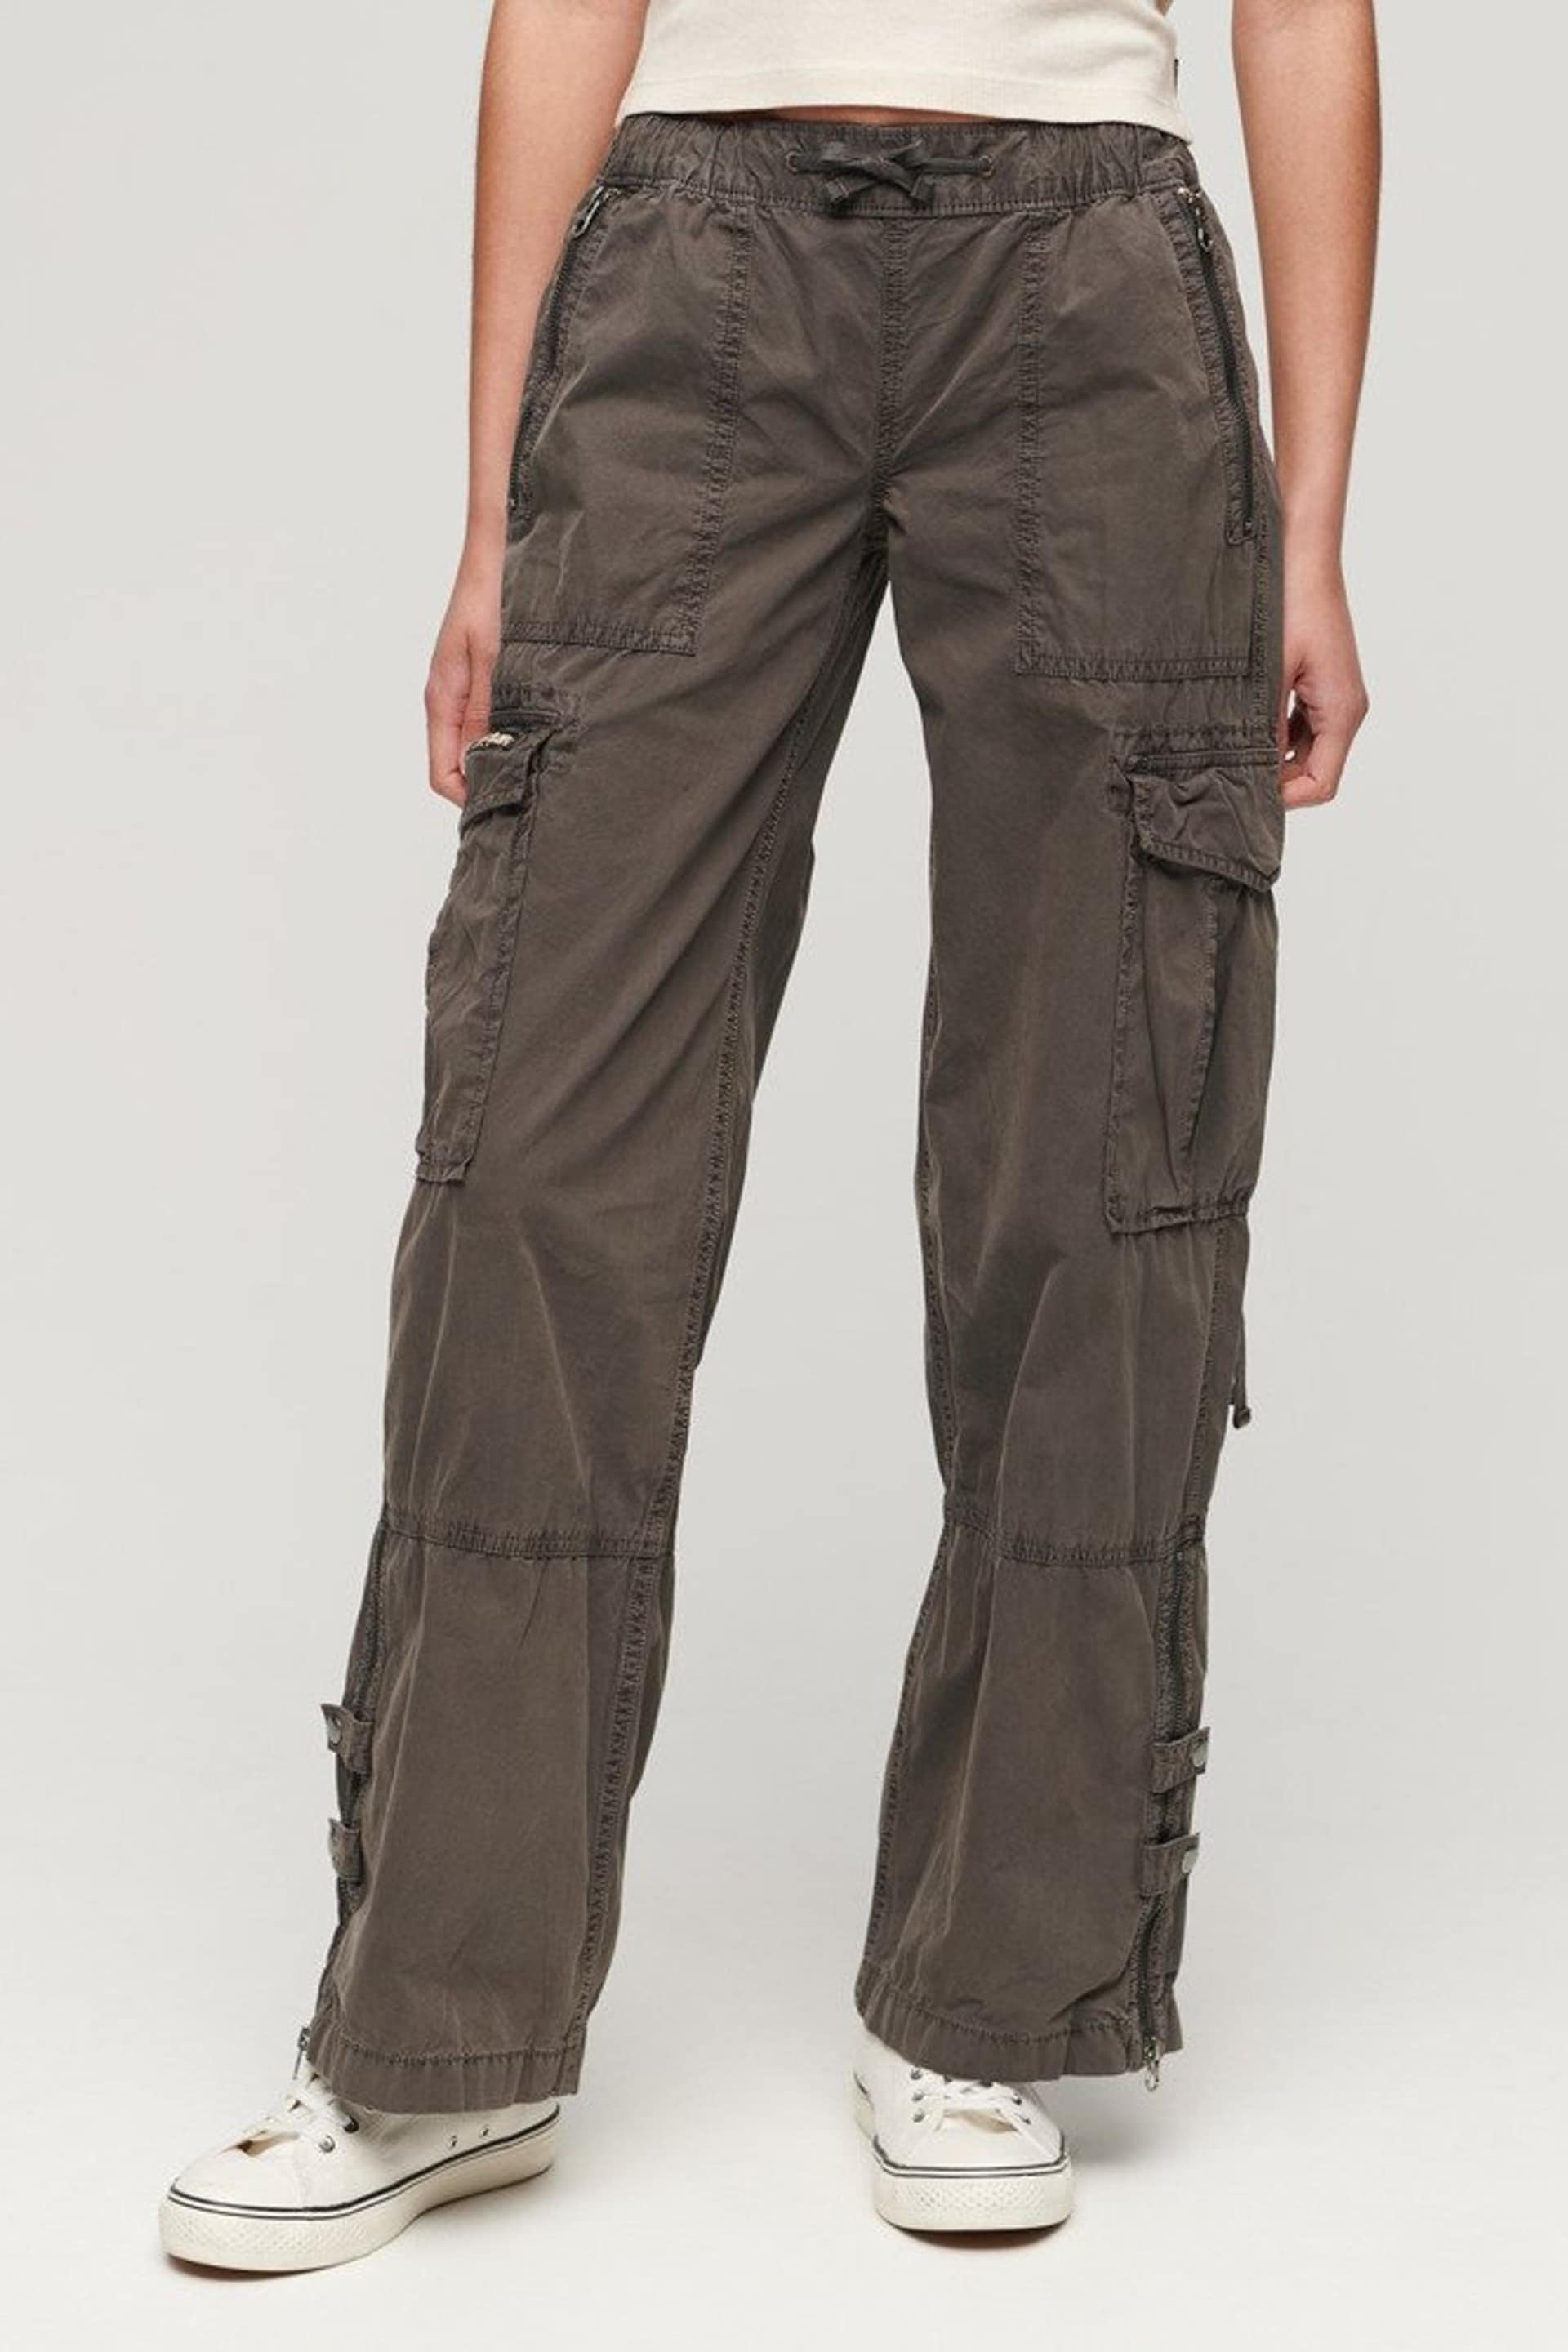 Superdry Brown Vintage Elastic Cargo Utility Trousers - Image 1 of 5